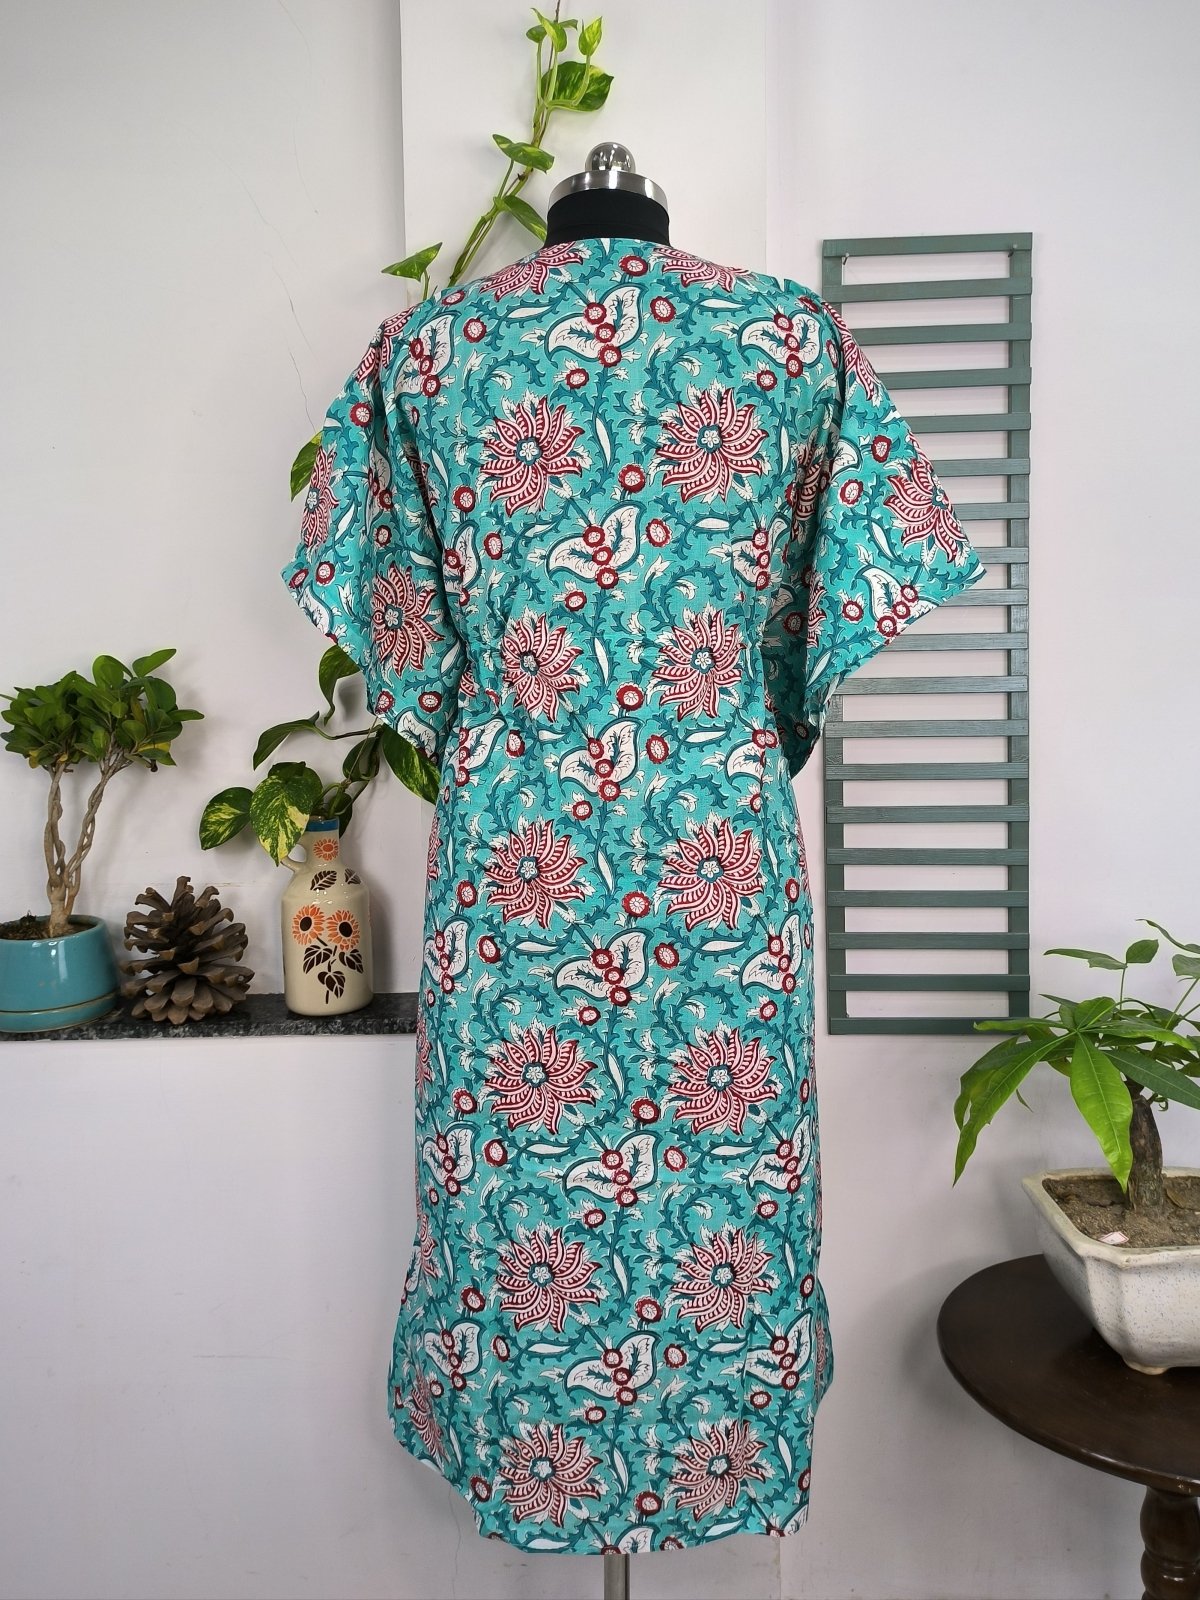 Boho Style Kaftan Dress | Indian Handprinted with Monte Carlo Lotus Bloom | Breathable Lightweight Cotton Fabric, Comfortable, Chic Summer Look - The Eastern Loom